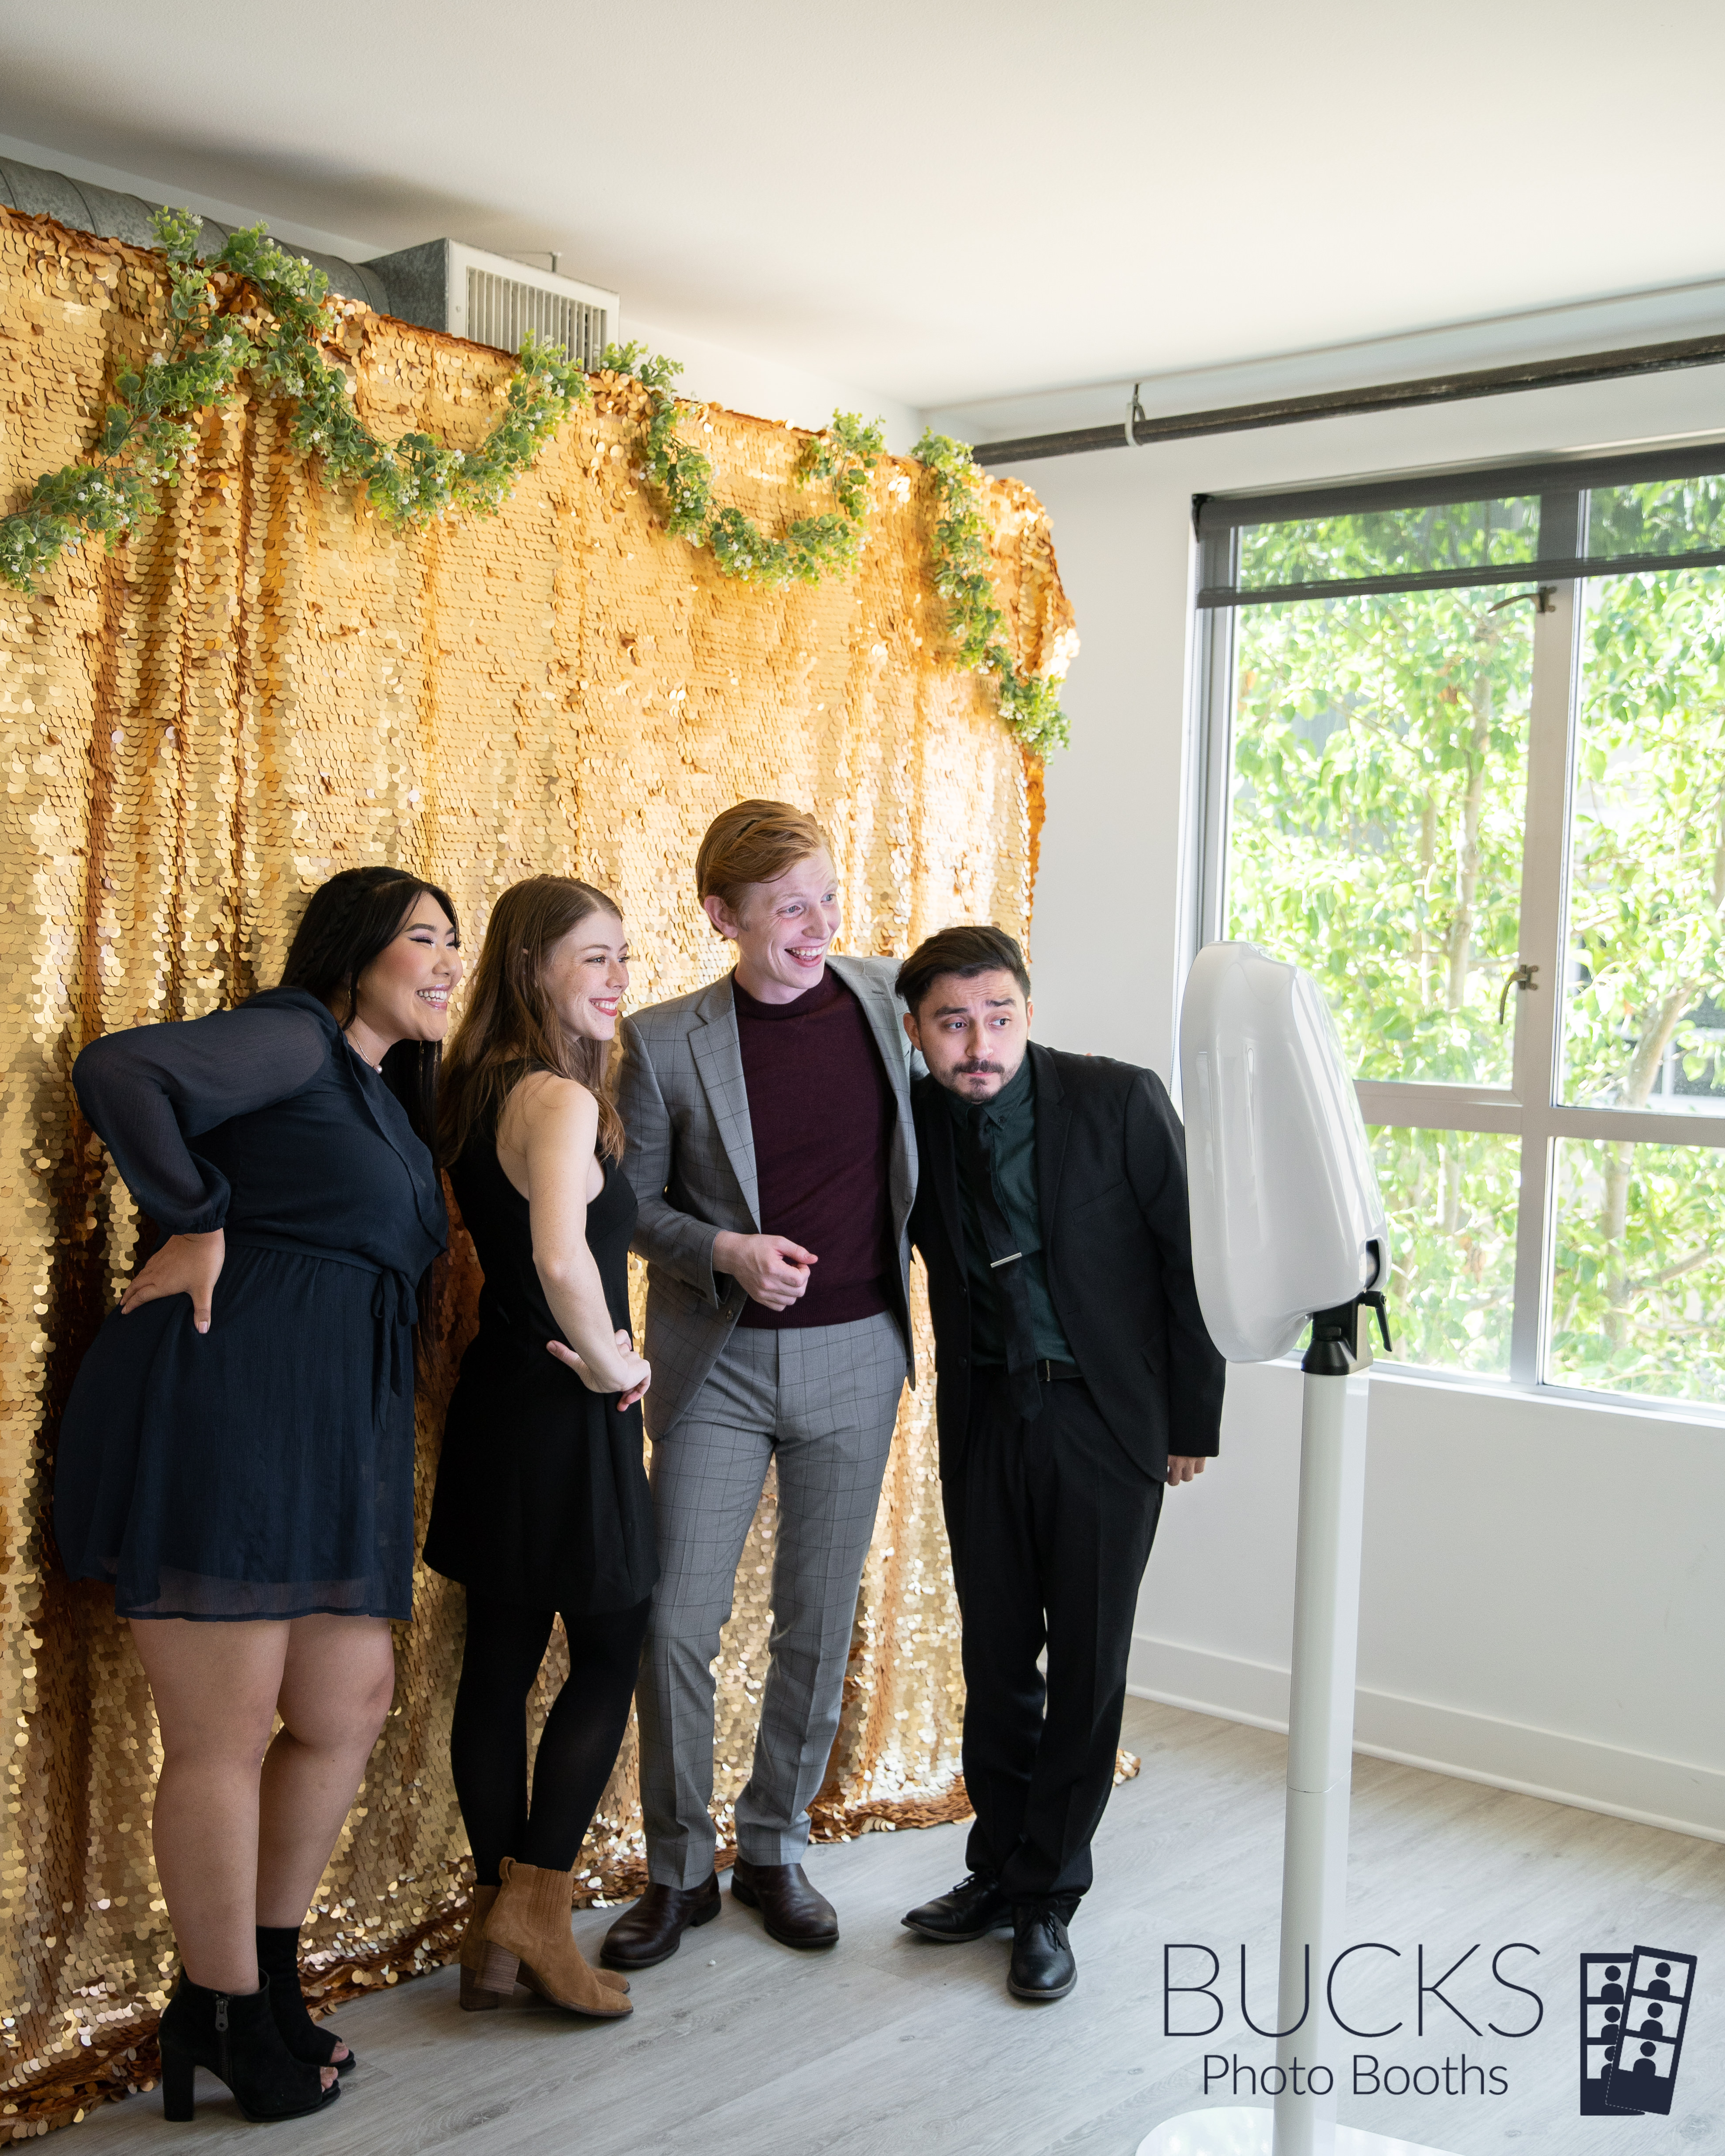 Photo Booth Rental With Gold Backdrop Bucks Photo Booths